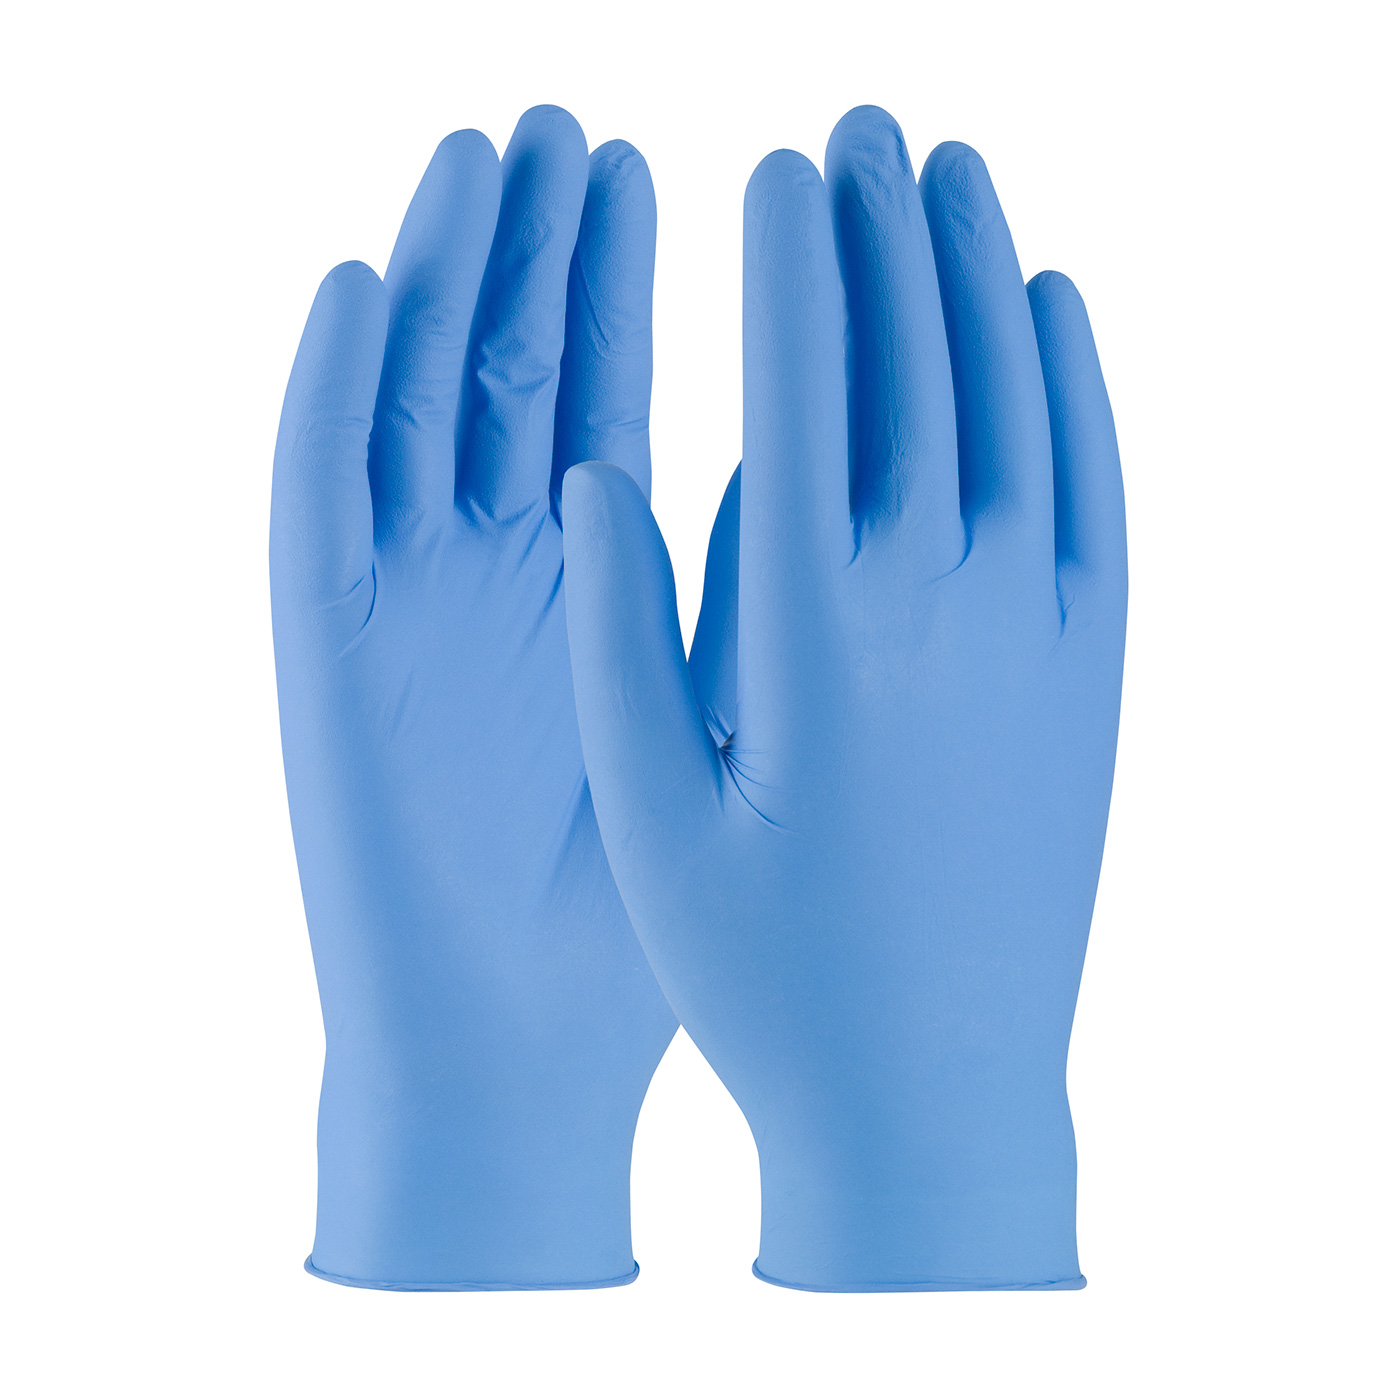 #63-532PF Ambi-dex® Axle Disposable Nitrile Glove, Powder-Free with Textured Grip - 4 mil

